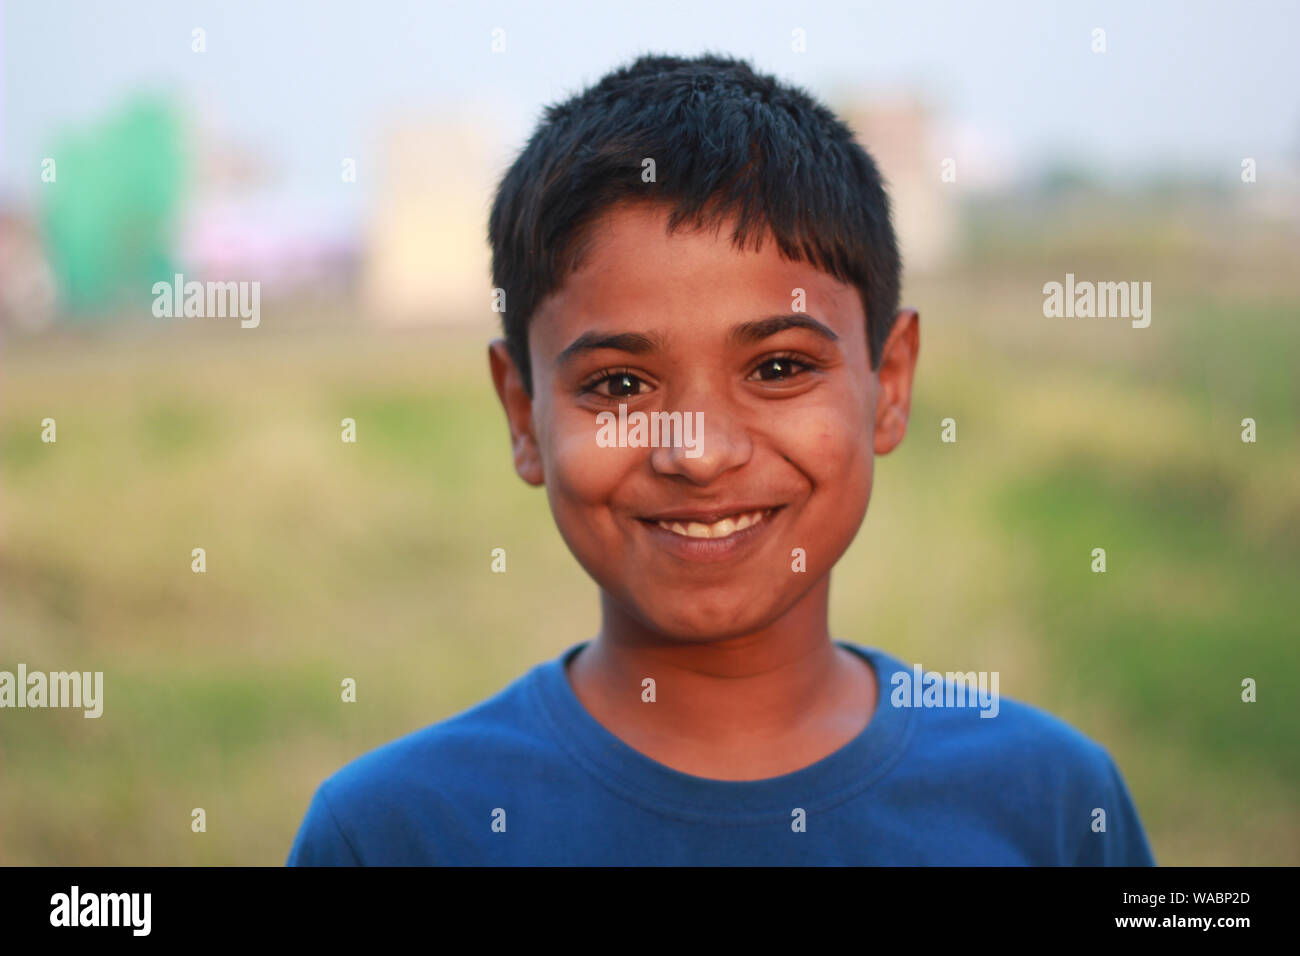 One Indian country boy with innocent smile Stock Photo